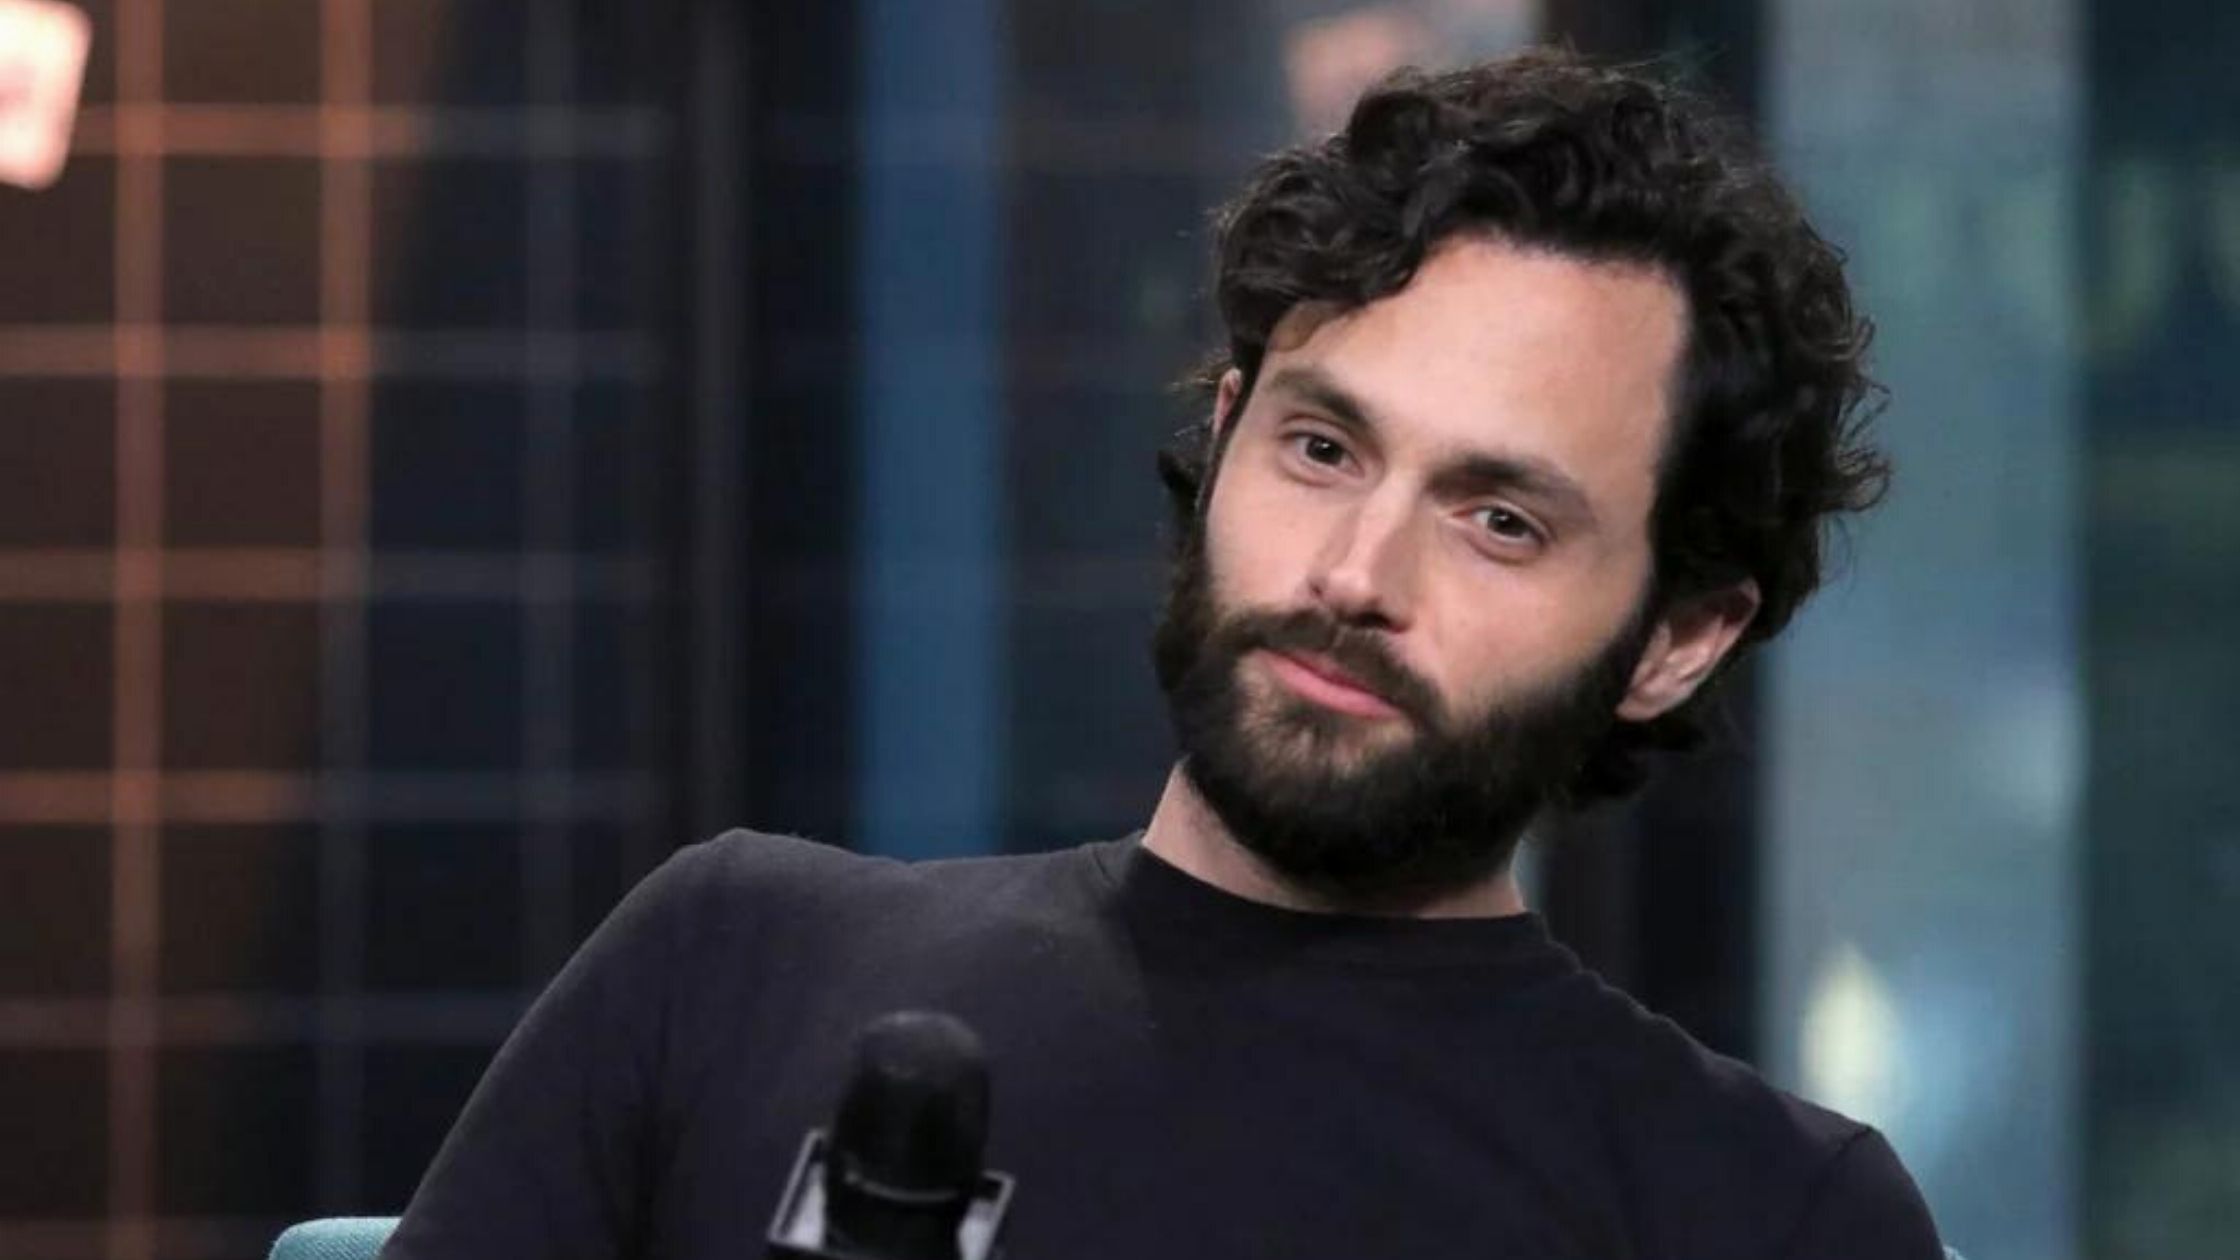 Penn Badgley Completes A Day Of Filming For 'You' Season 4 In London